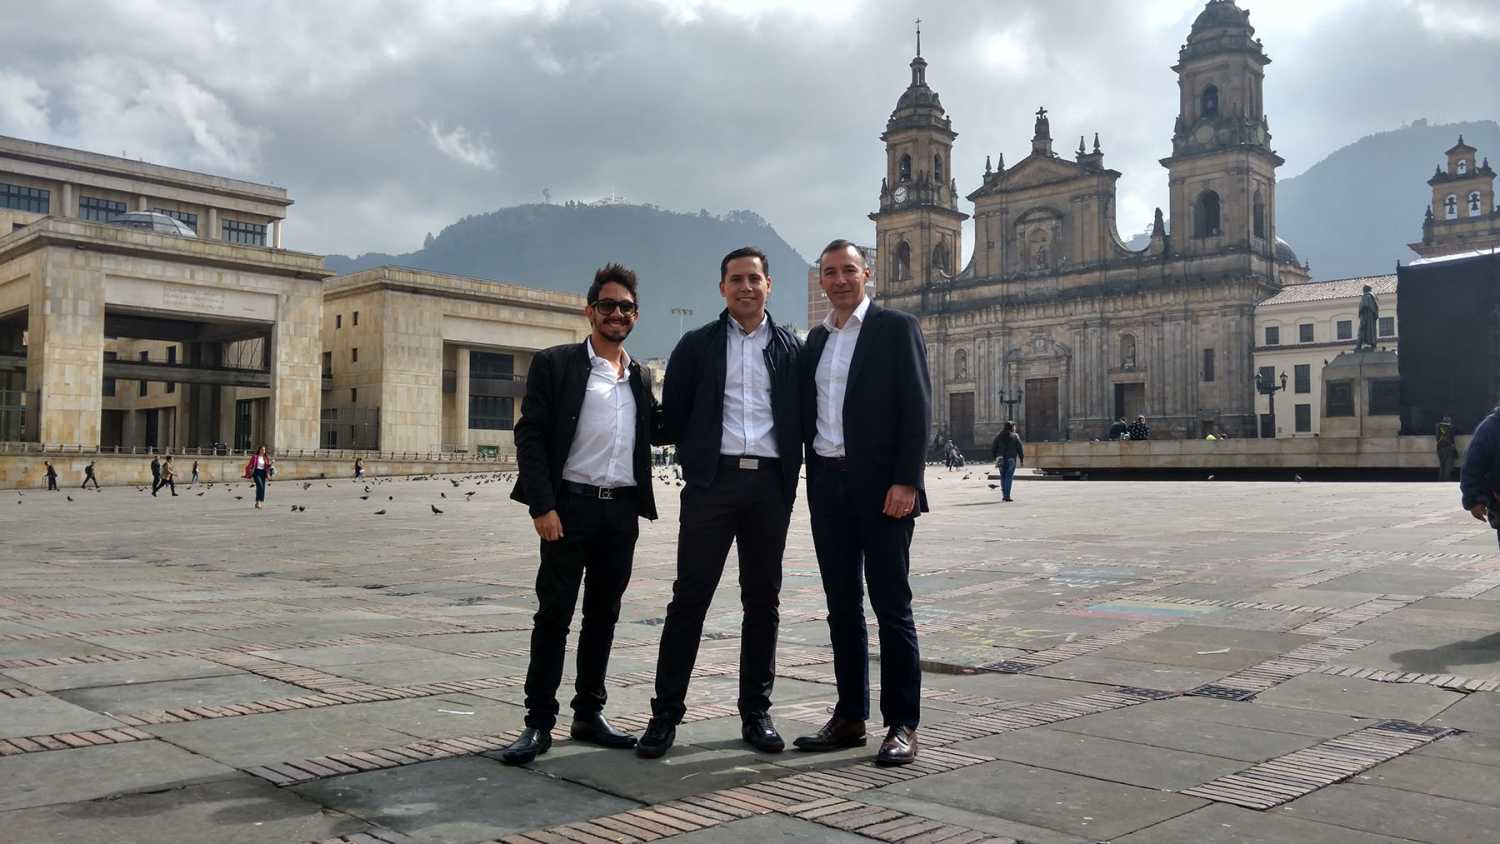 In Bogota Old Town: Robe’s Latin America regional sales manager Guillermo Traverso in the middle, flanked by Juan Camilo Triana, sales manager for AV Com on the left, and Camilo Aranguren, CEO of AV Com on the right